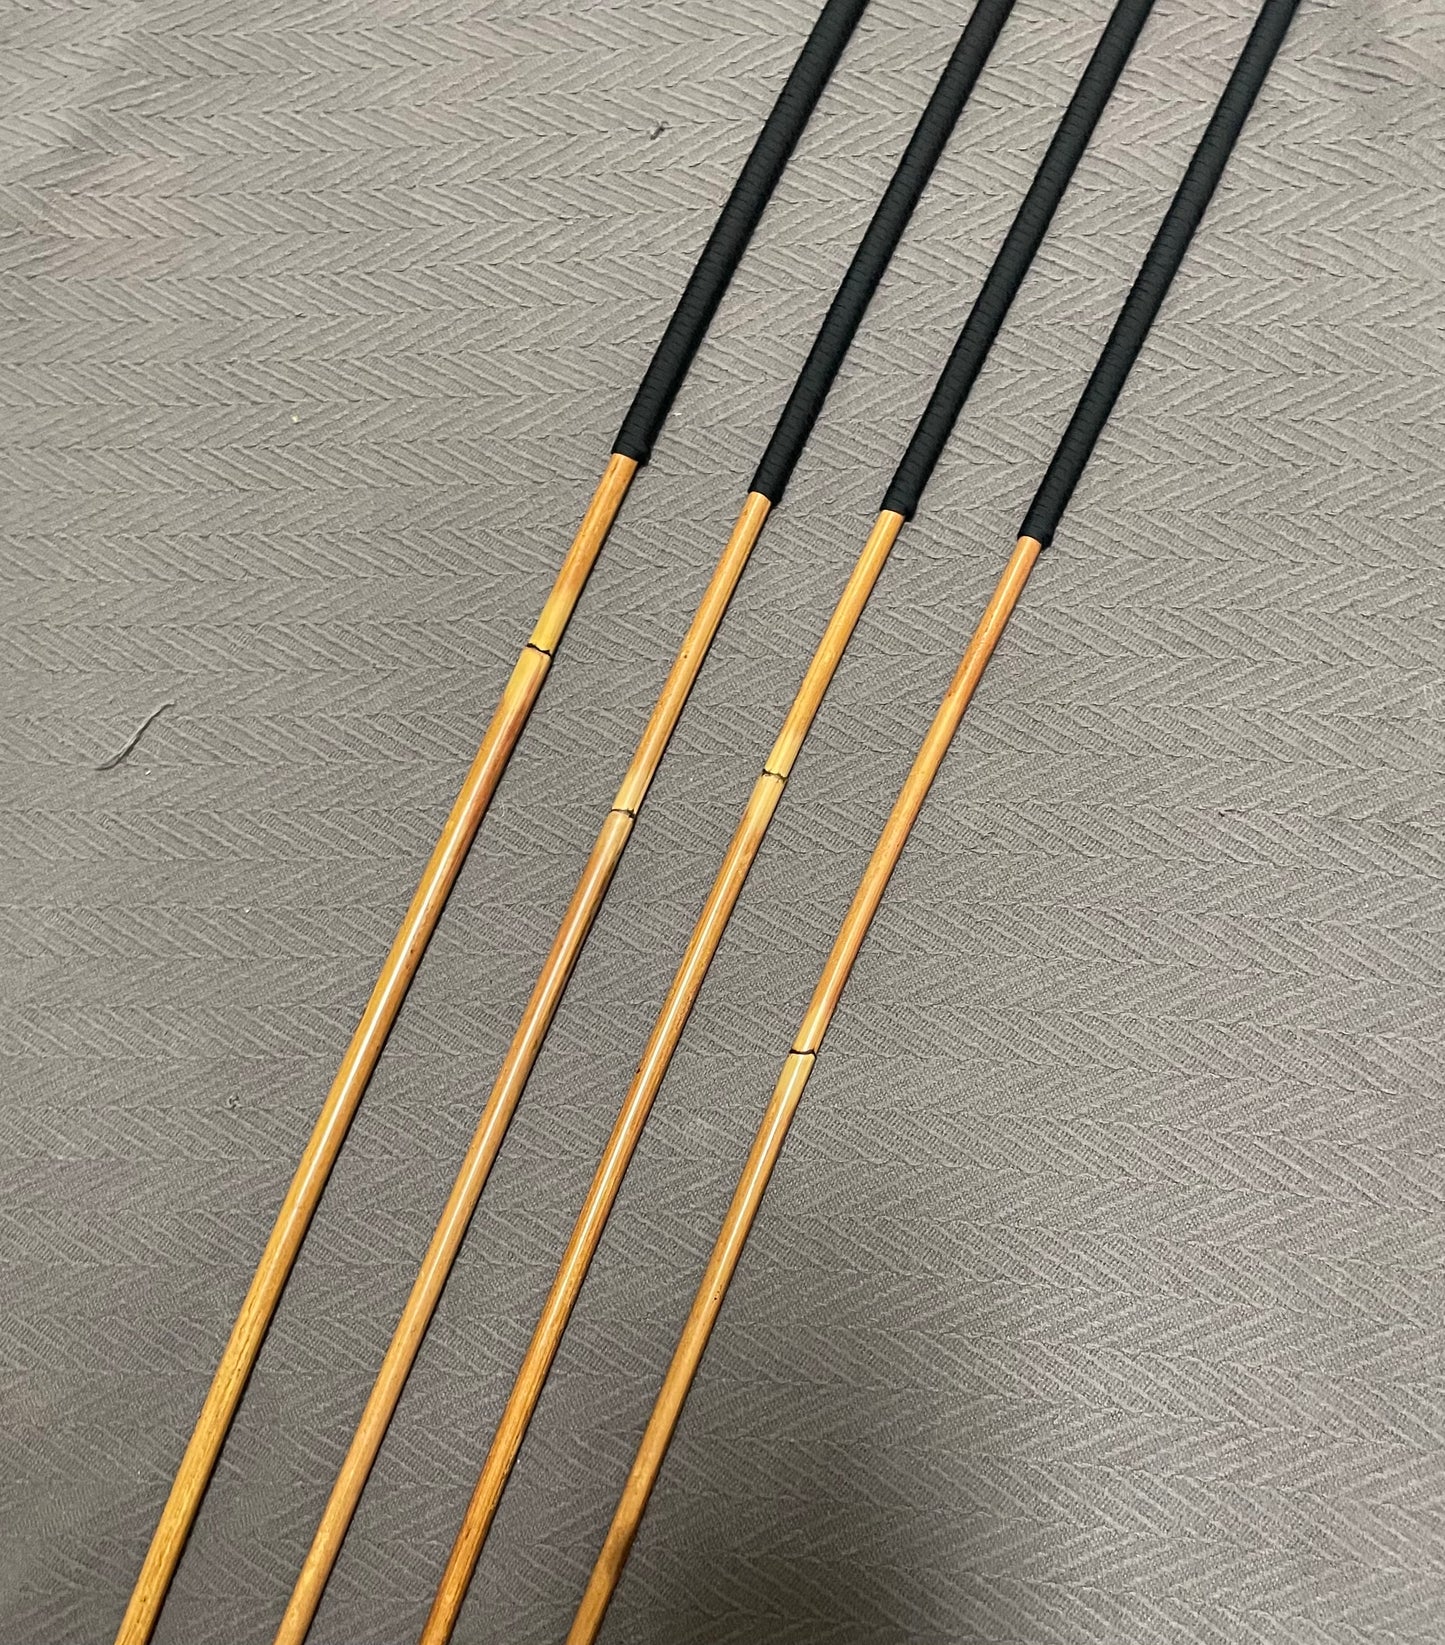 Golden / Honey Smoked Dragon Rattan Canes with Black Paracord Handles - 95 to 98 cms Length & 9 - 12.5 mm Diameters - Englishvice Canes